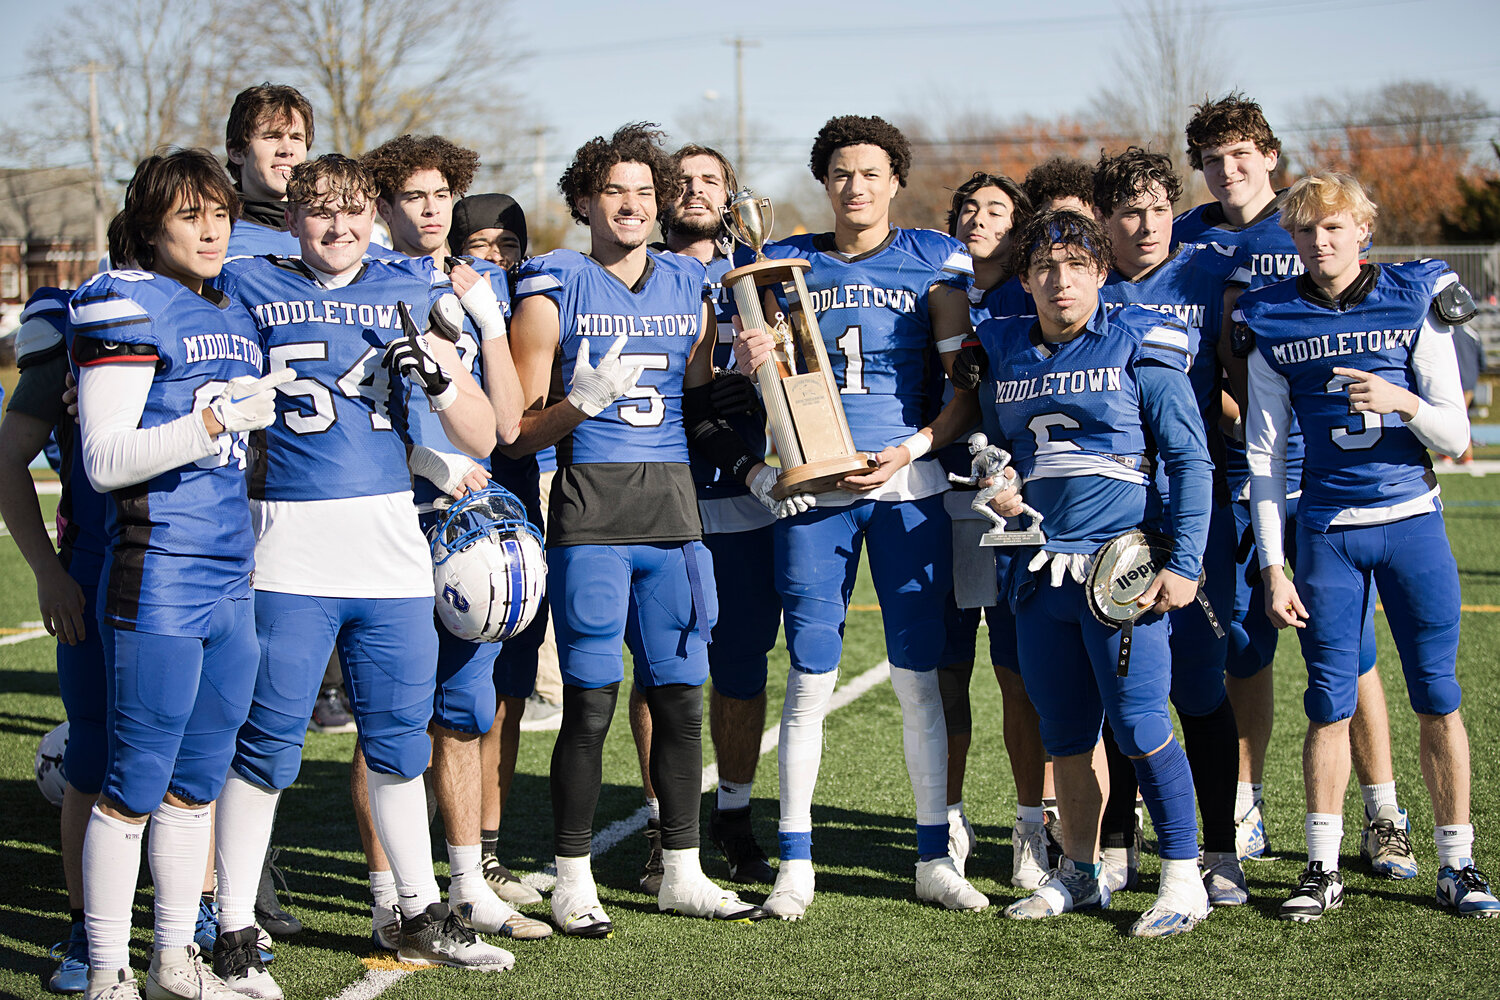 Middletown High School seniors pose with their trophy after beating Portsmouth 20-6 in the annual Thanksgiving game.